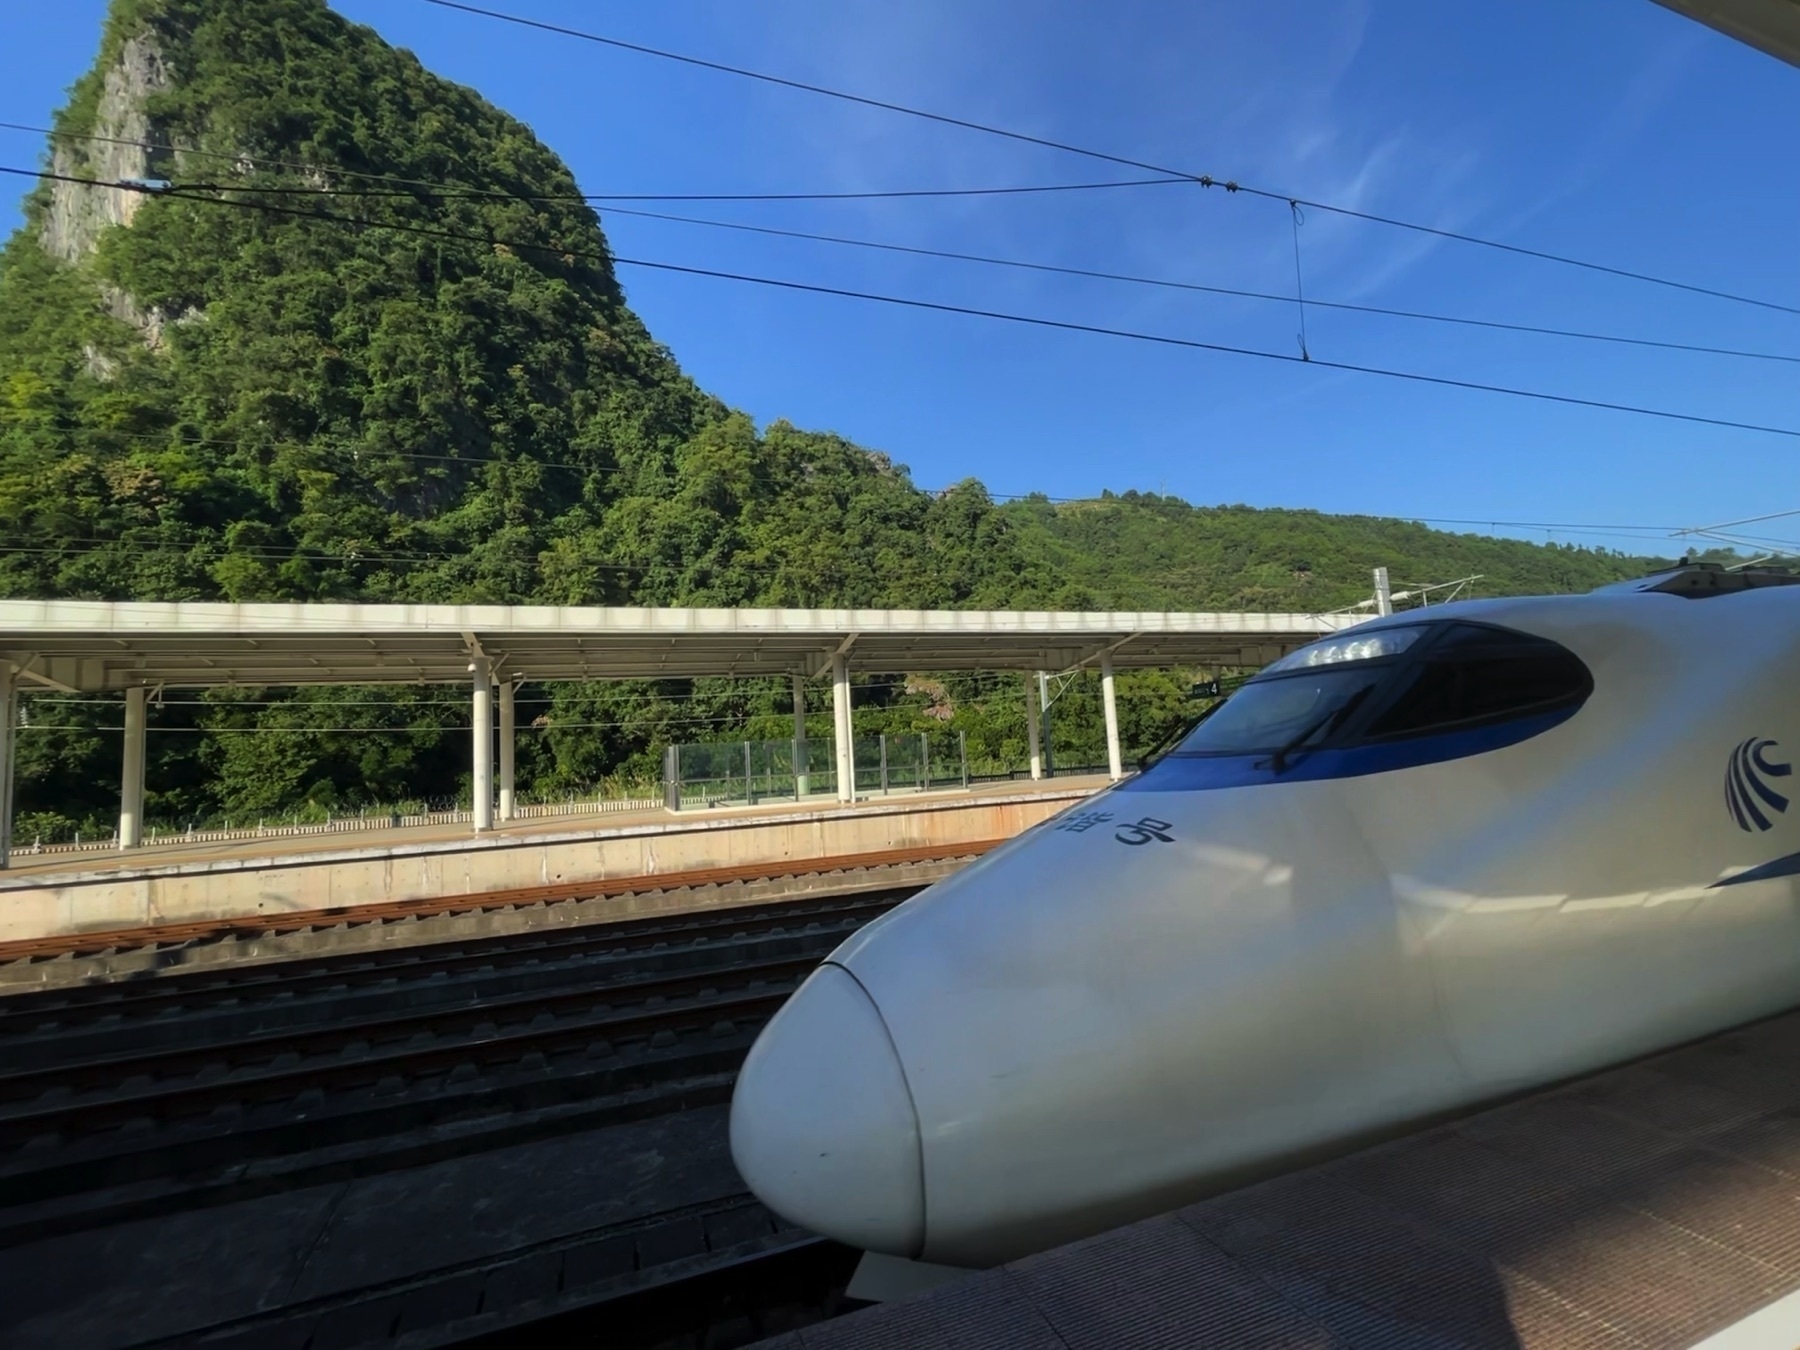 Front of a Chinese high speed train with a mountain in the background